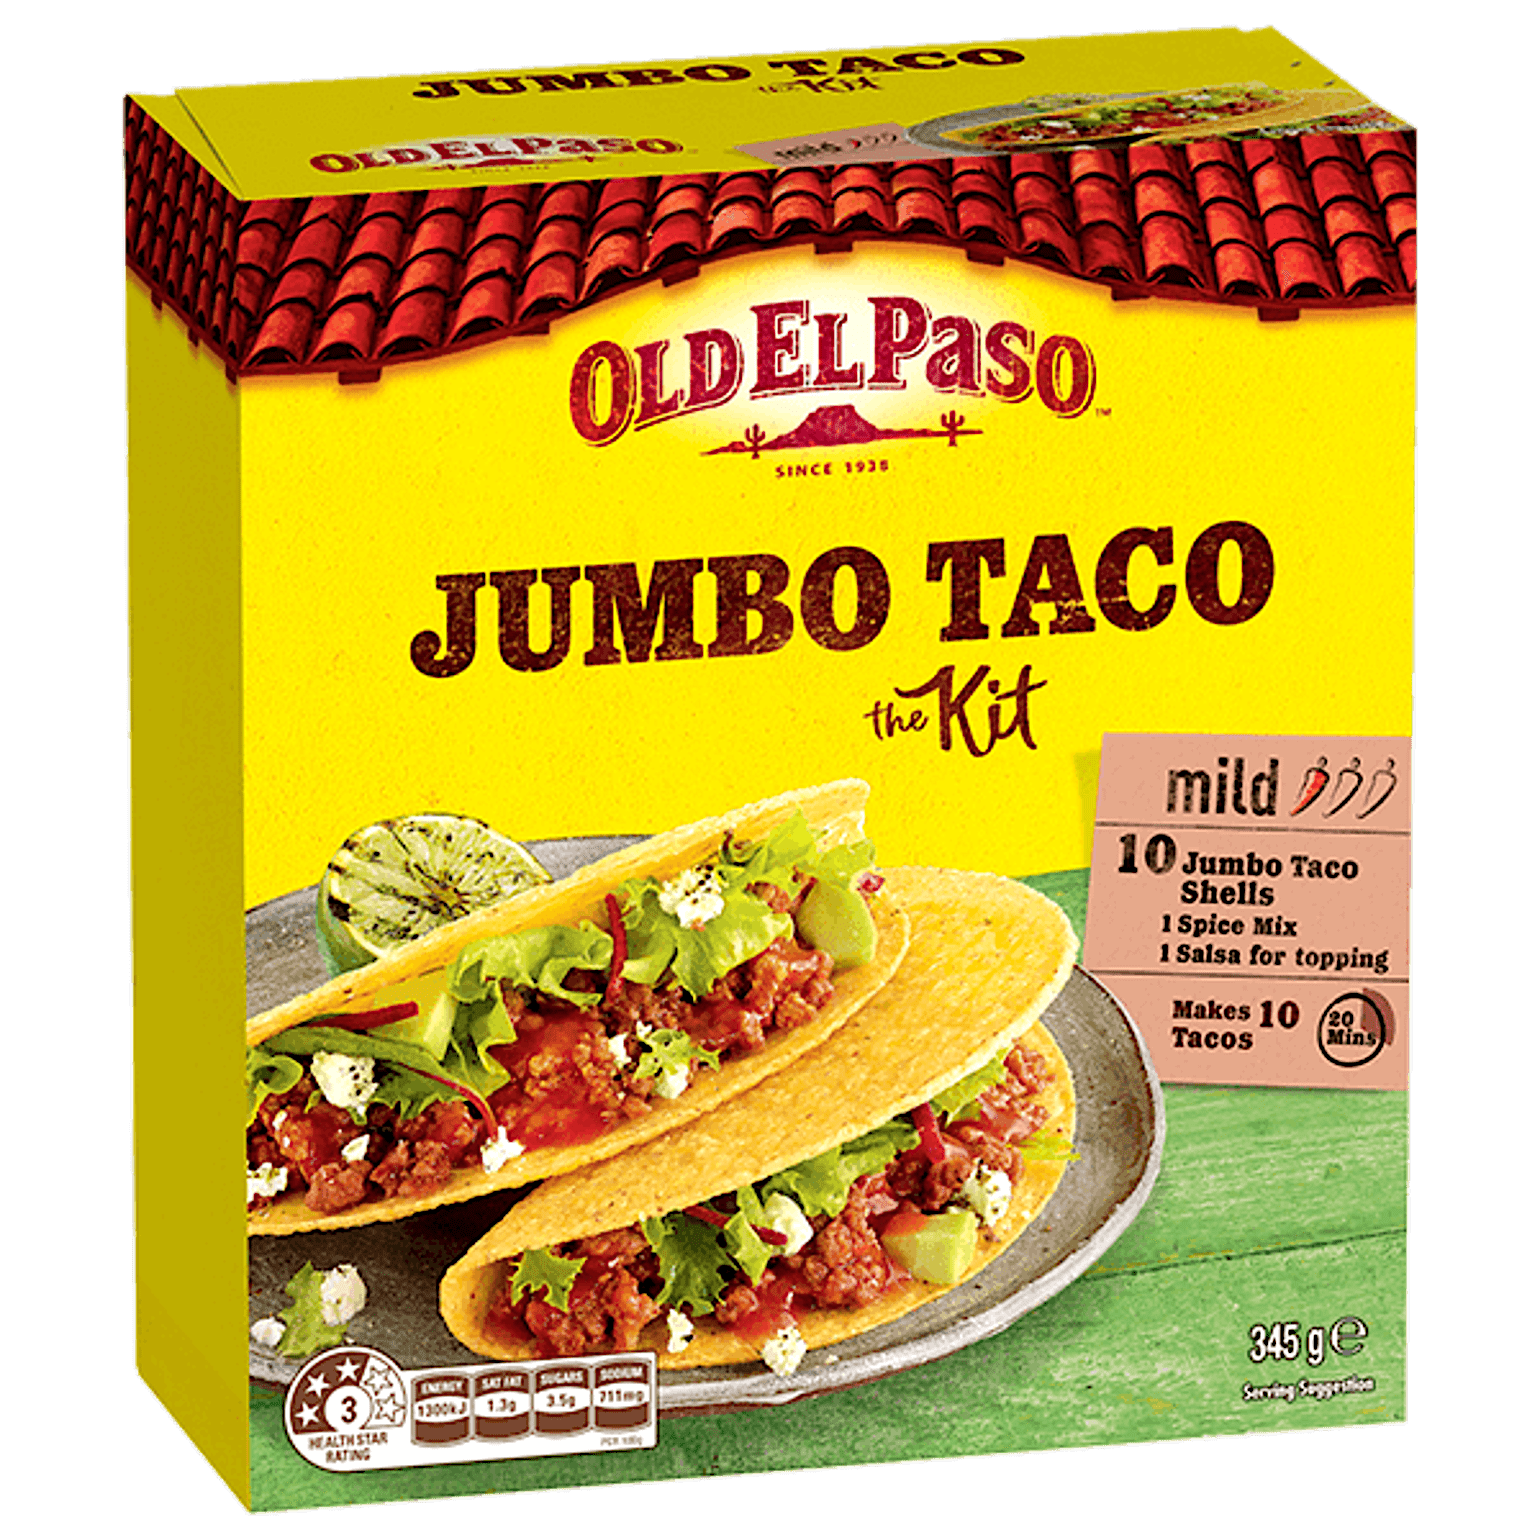 a pack of Old El Paso's mild jumbo taco kit containing taco shells, spice mix & salsa for topping (345g)